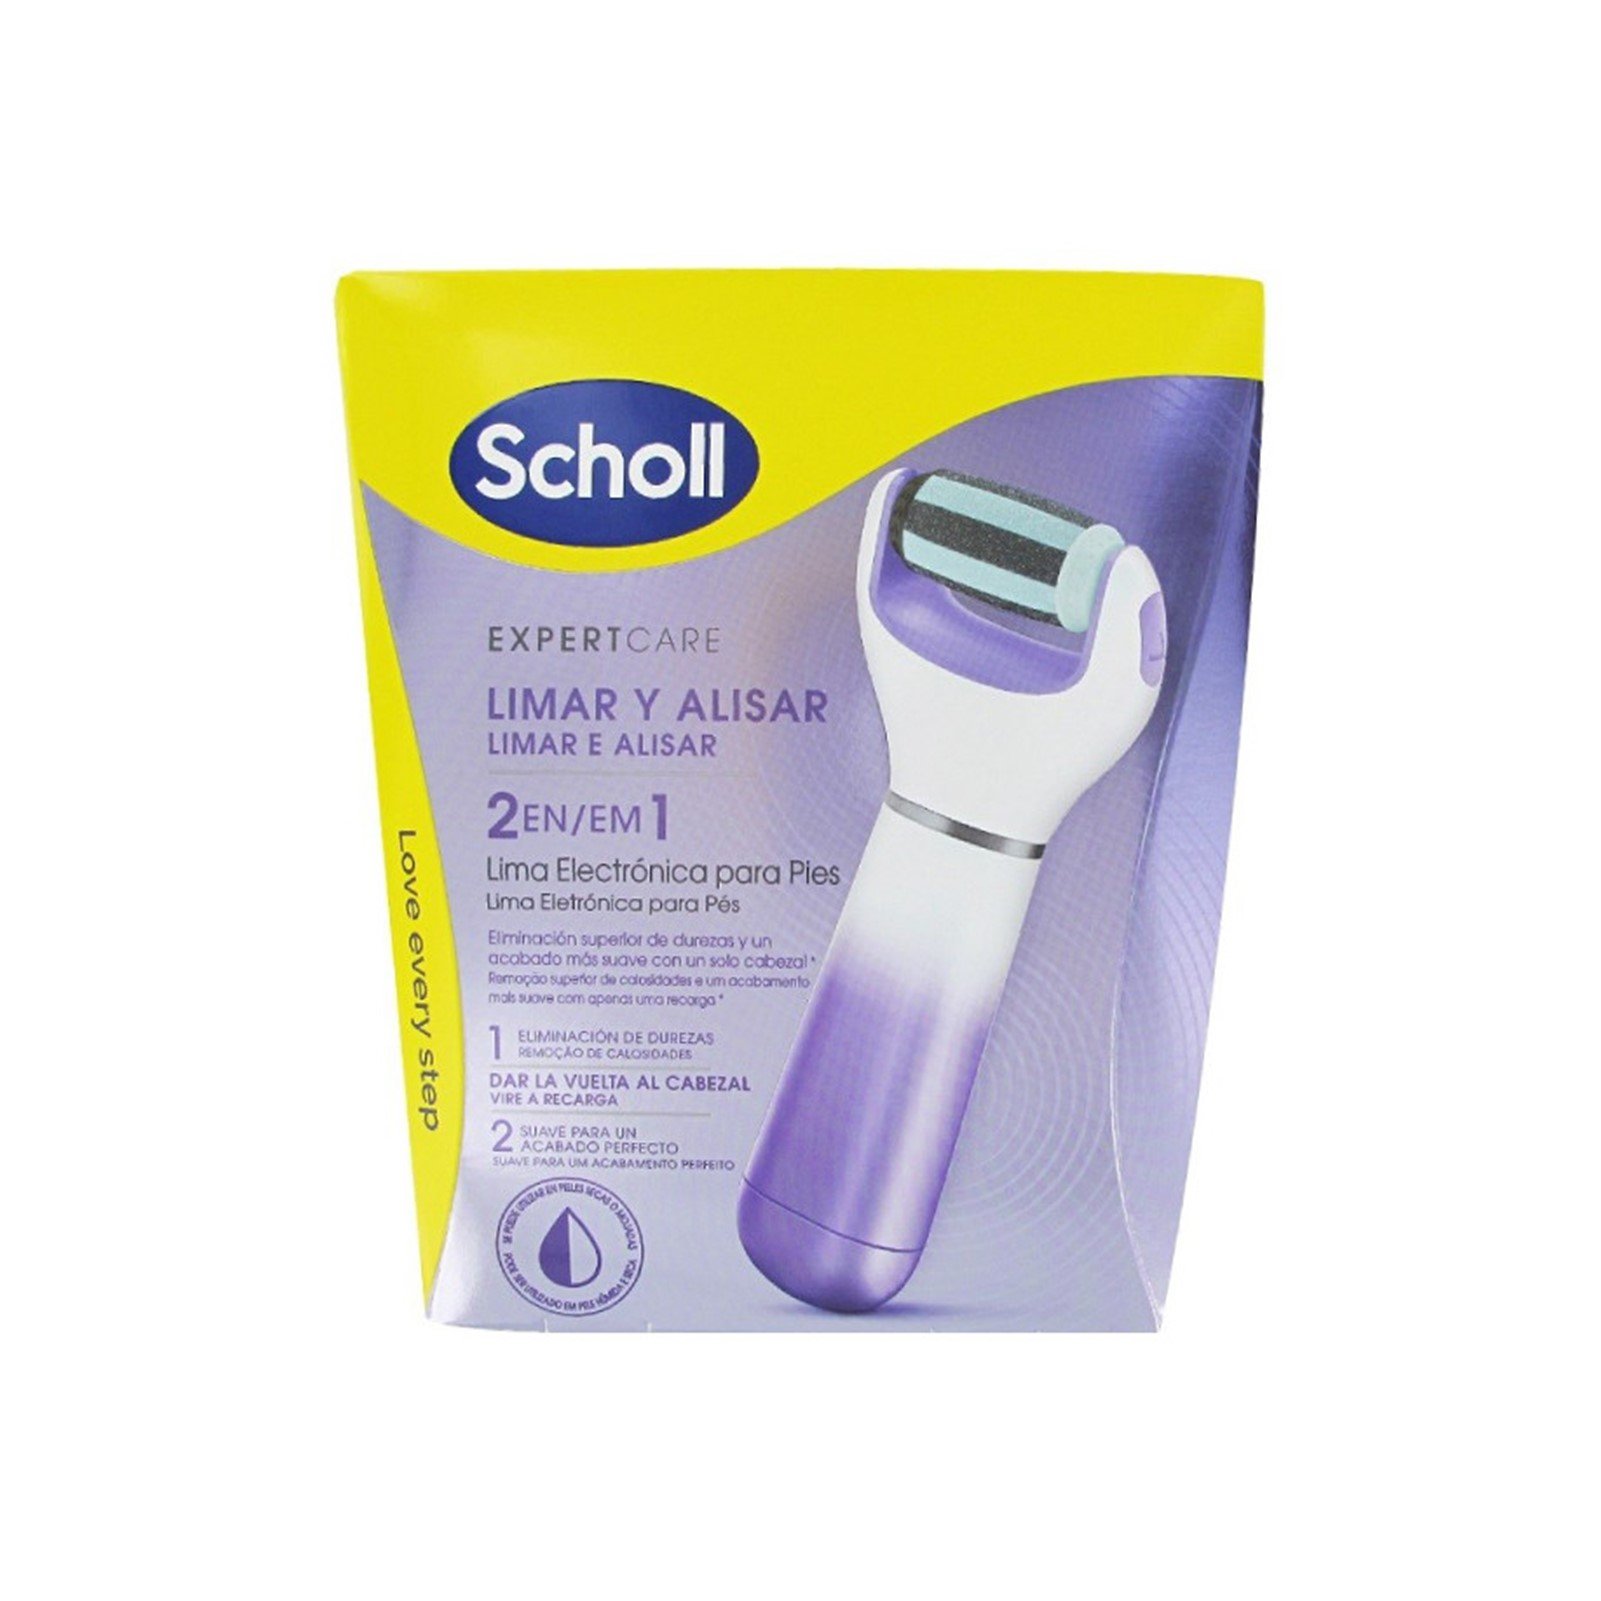 https://static.beautytocare.com/media/catalog/product/d/r/dr-scholl-expert-care-file-smooth-2-in-1-electronic-foot-file-system.jpg